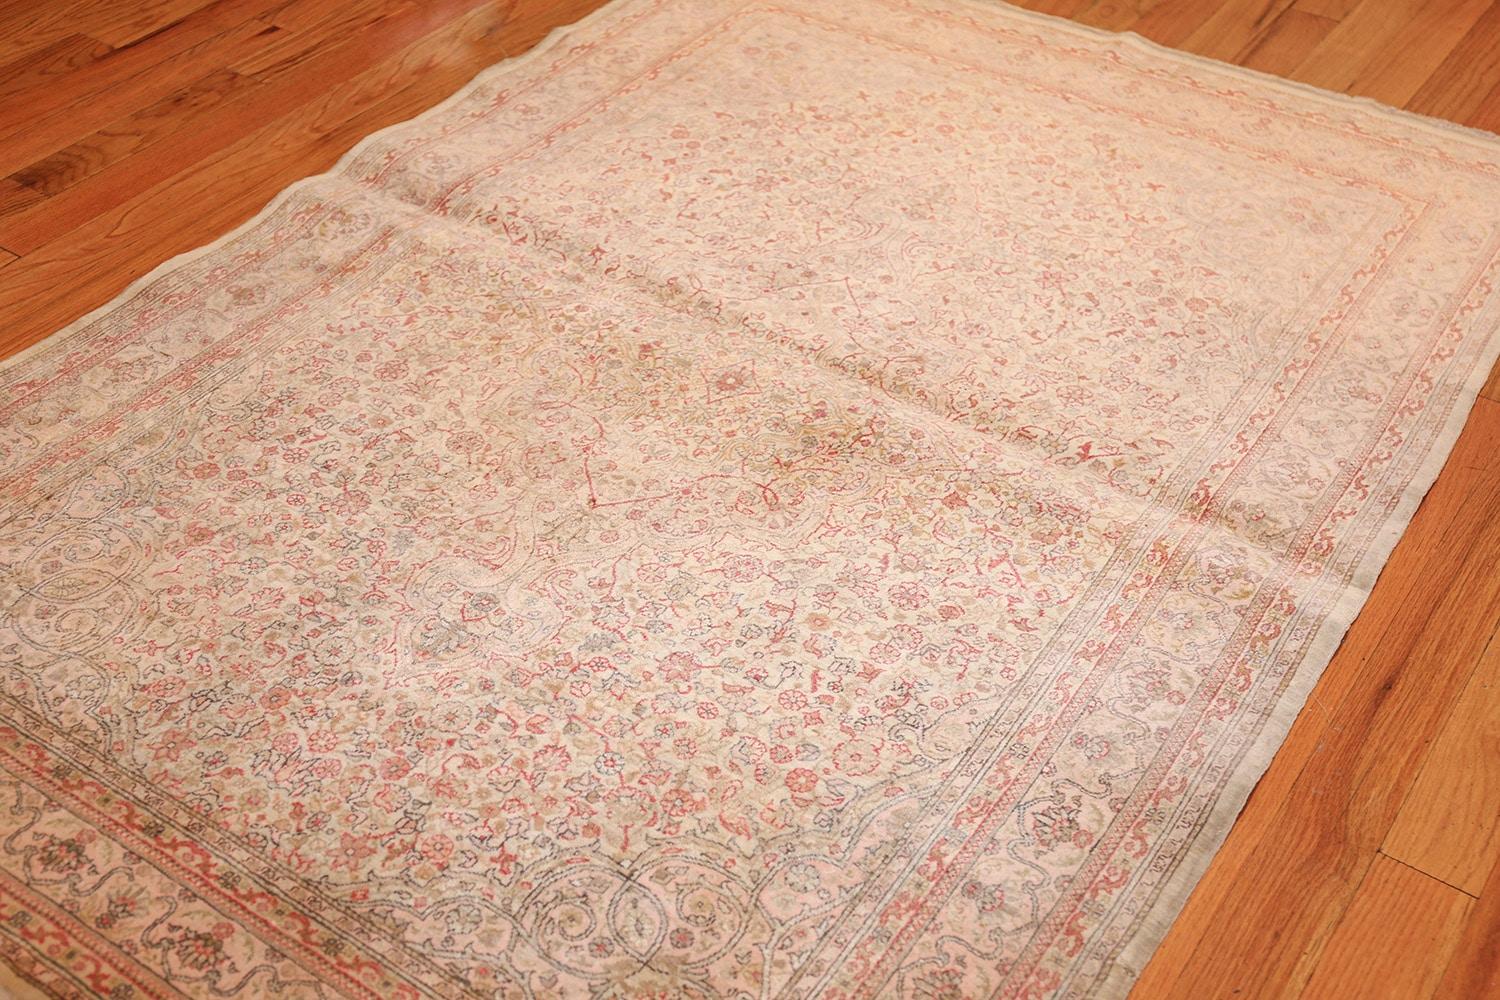 Small size and finely woven antique Turkish Sivas rug, country of origin: Turkish, date circa 1920 - Size: 4 ft 7 in x 6 ft 7 in (1.4 m x 2.01 m). 

This antique Sivas rug, an antique Turkish rug, presents a soothing and sweet scene for the viewer